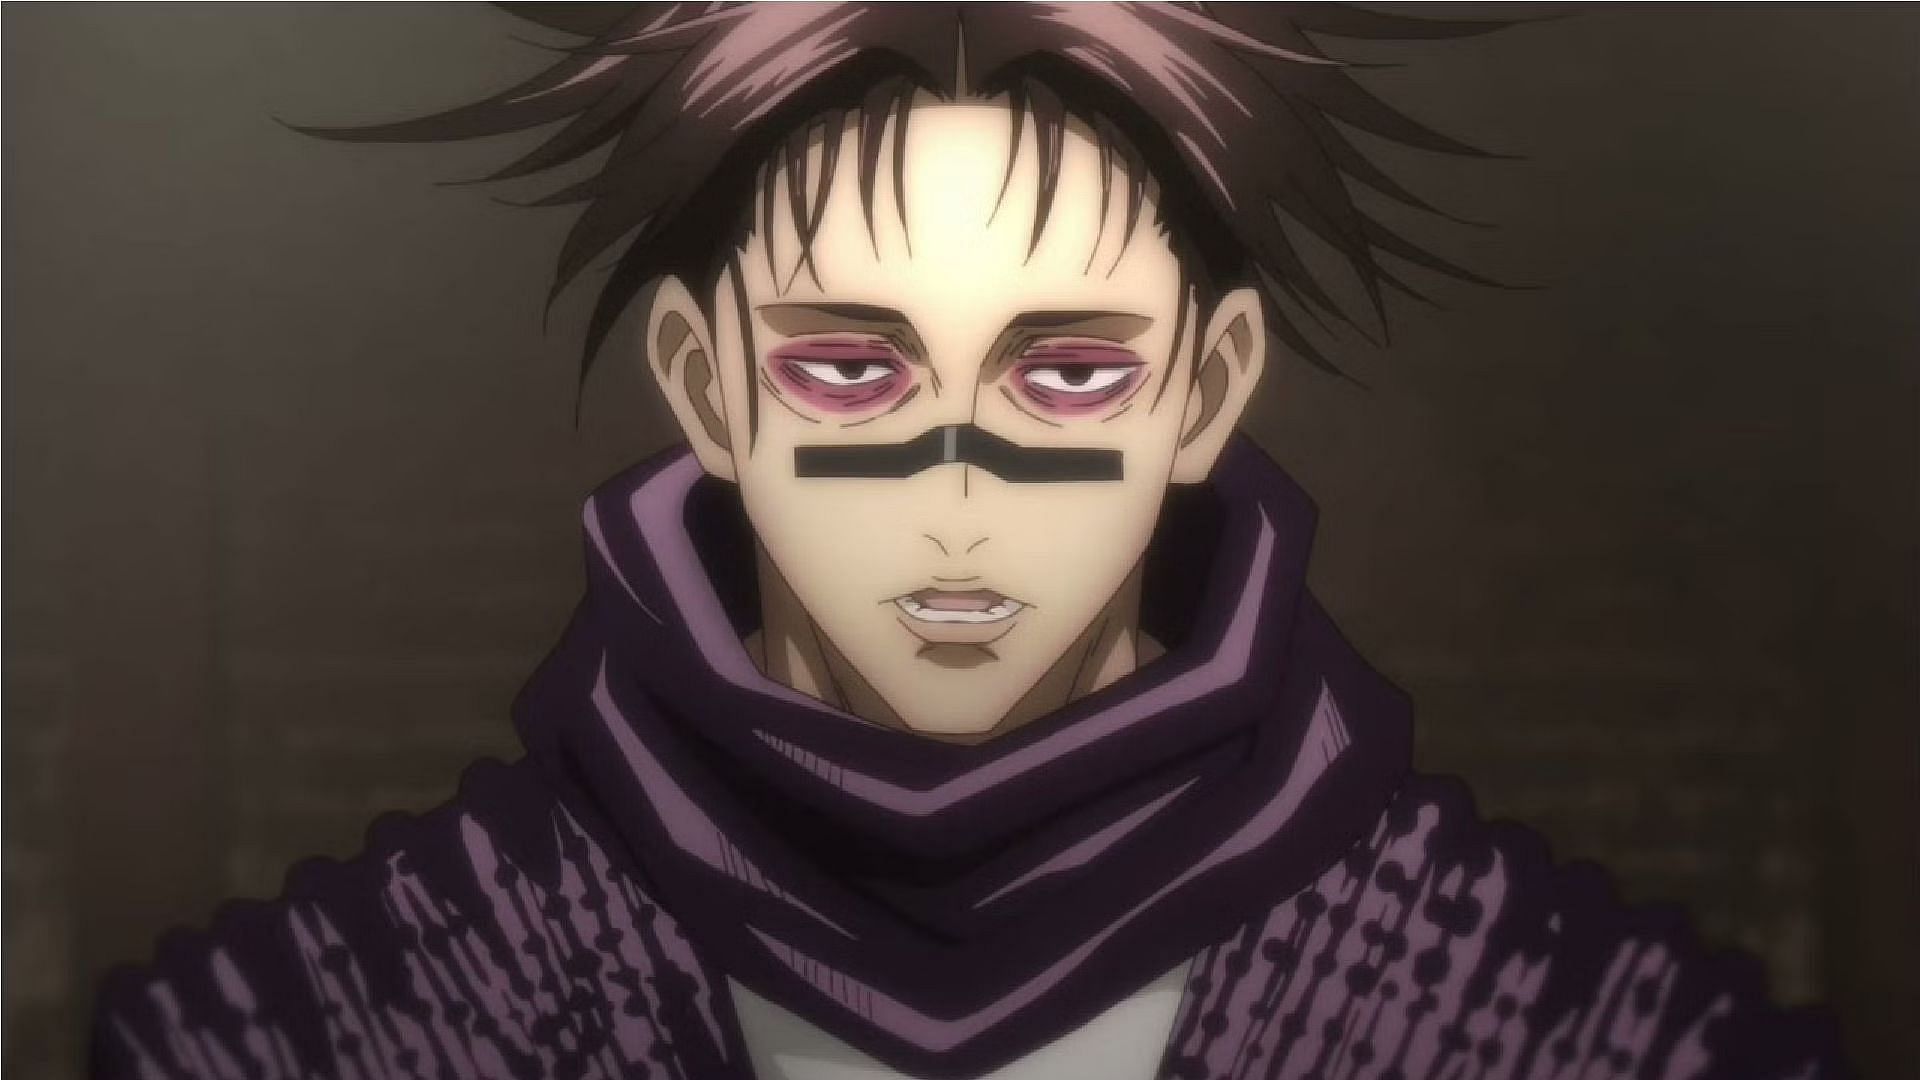 Choso as shown in the anime series (Image via MAPPA)